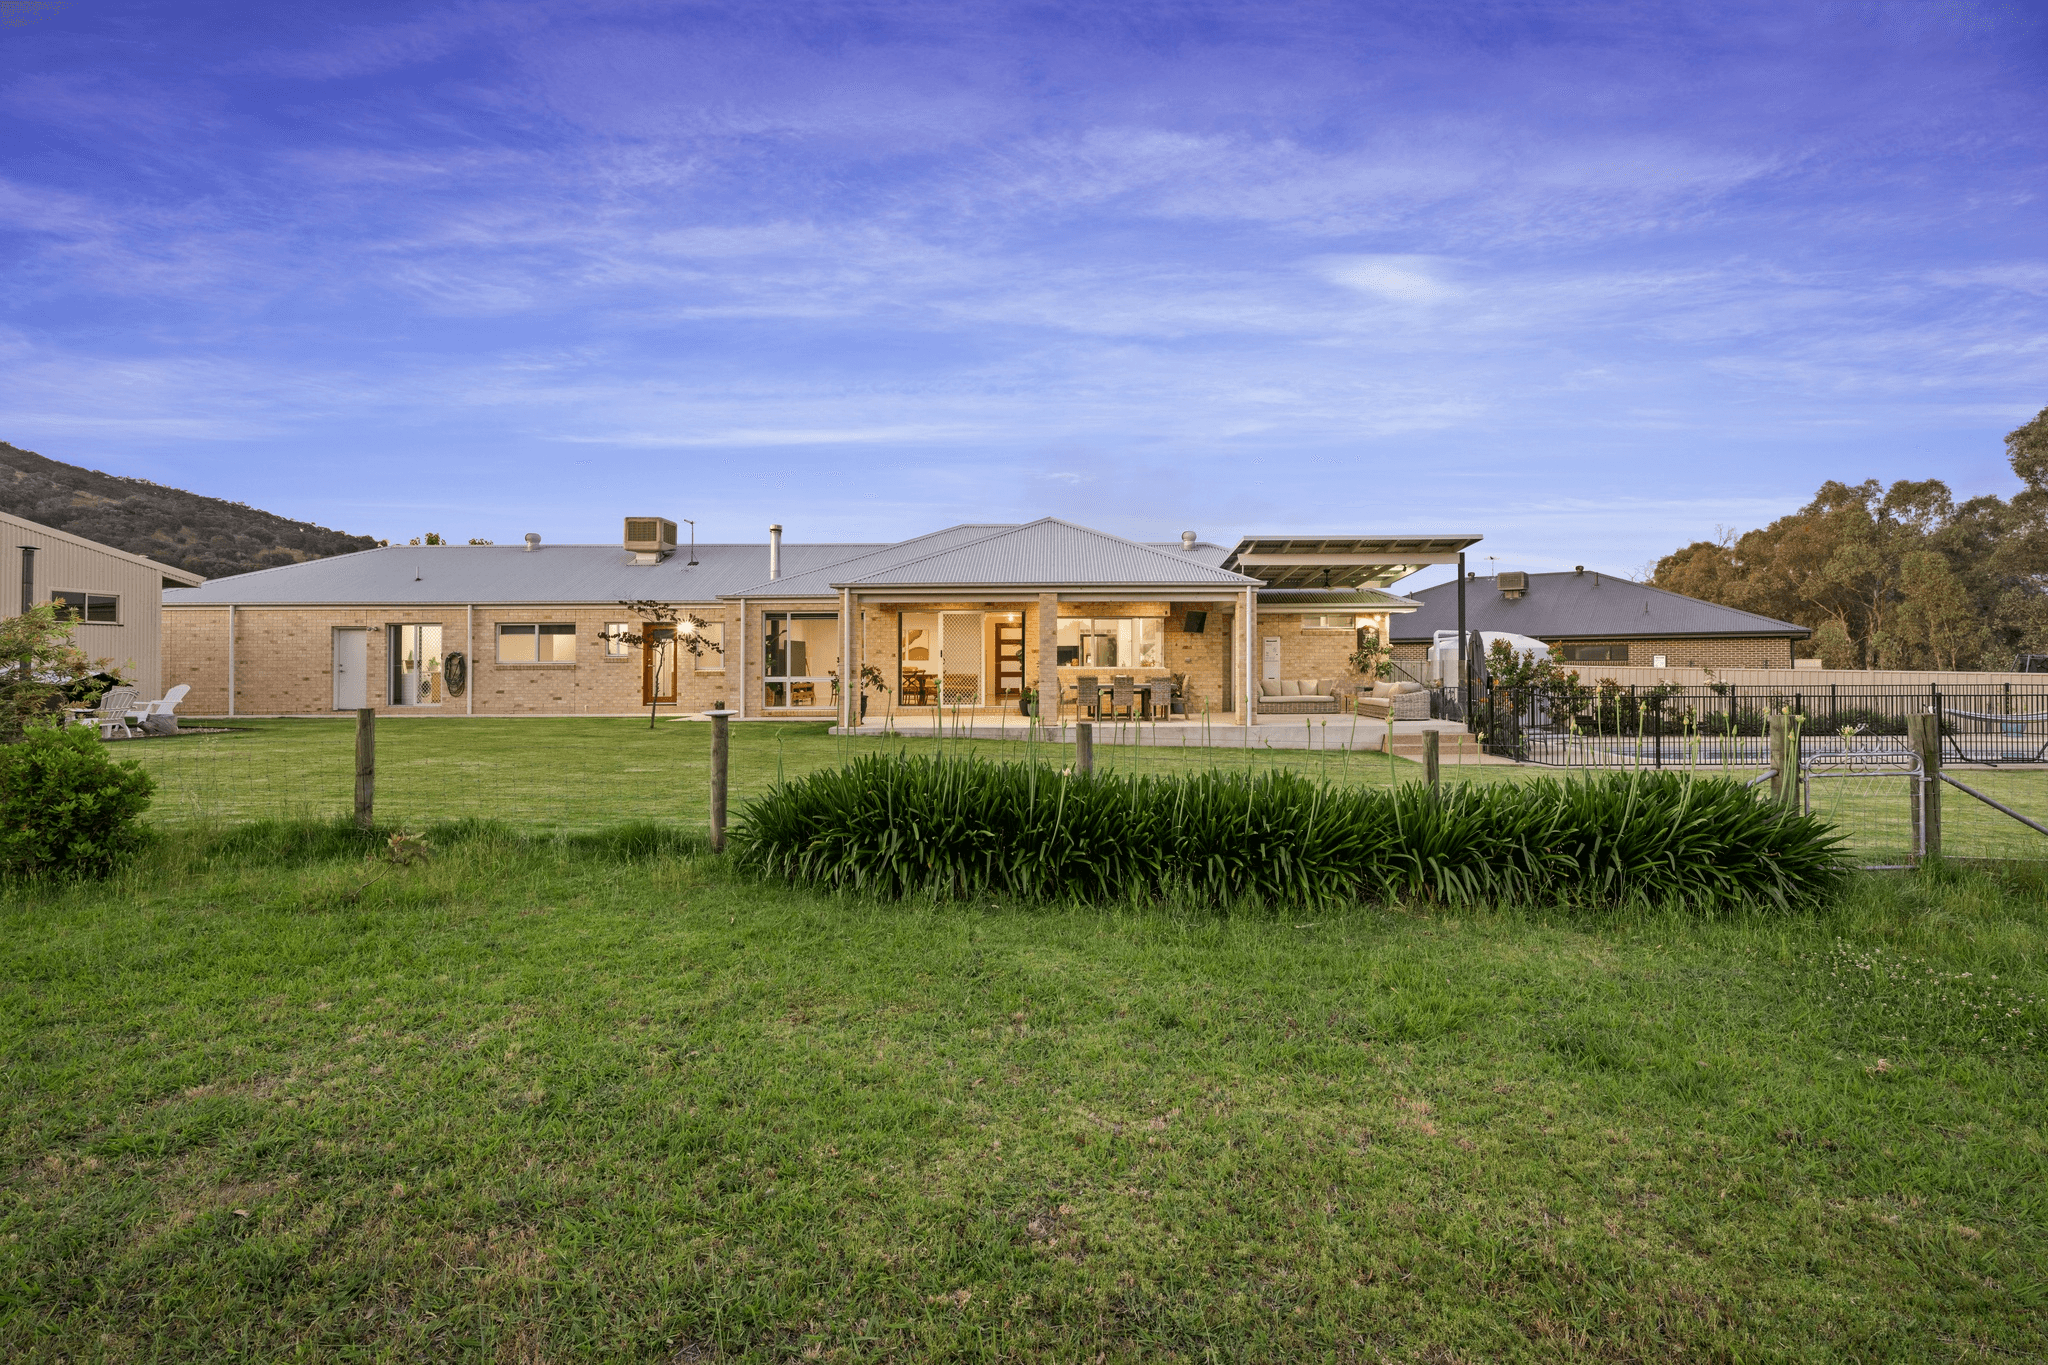 97 Whitehall Avenue, SPRINGDALE HEIGHTS, NSW 2641